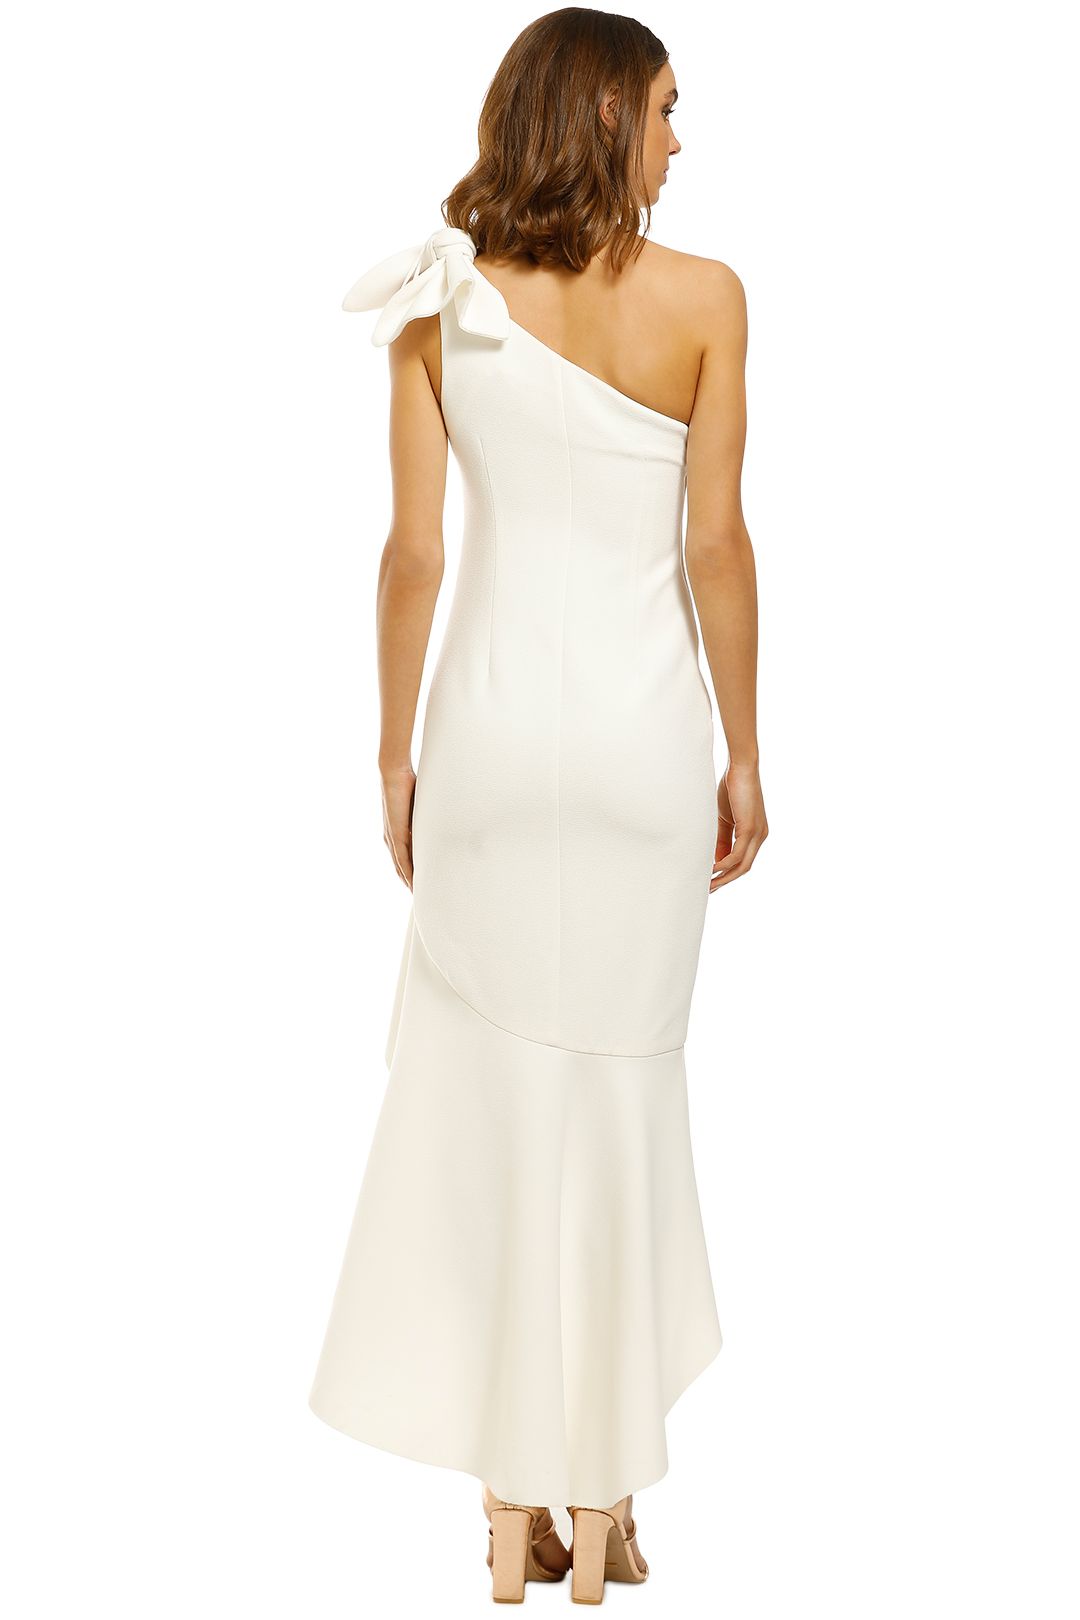 By-Johnny-Tie-Shoulder-Wave-Gown-Back